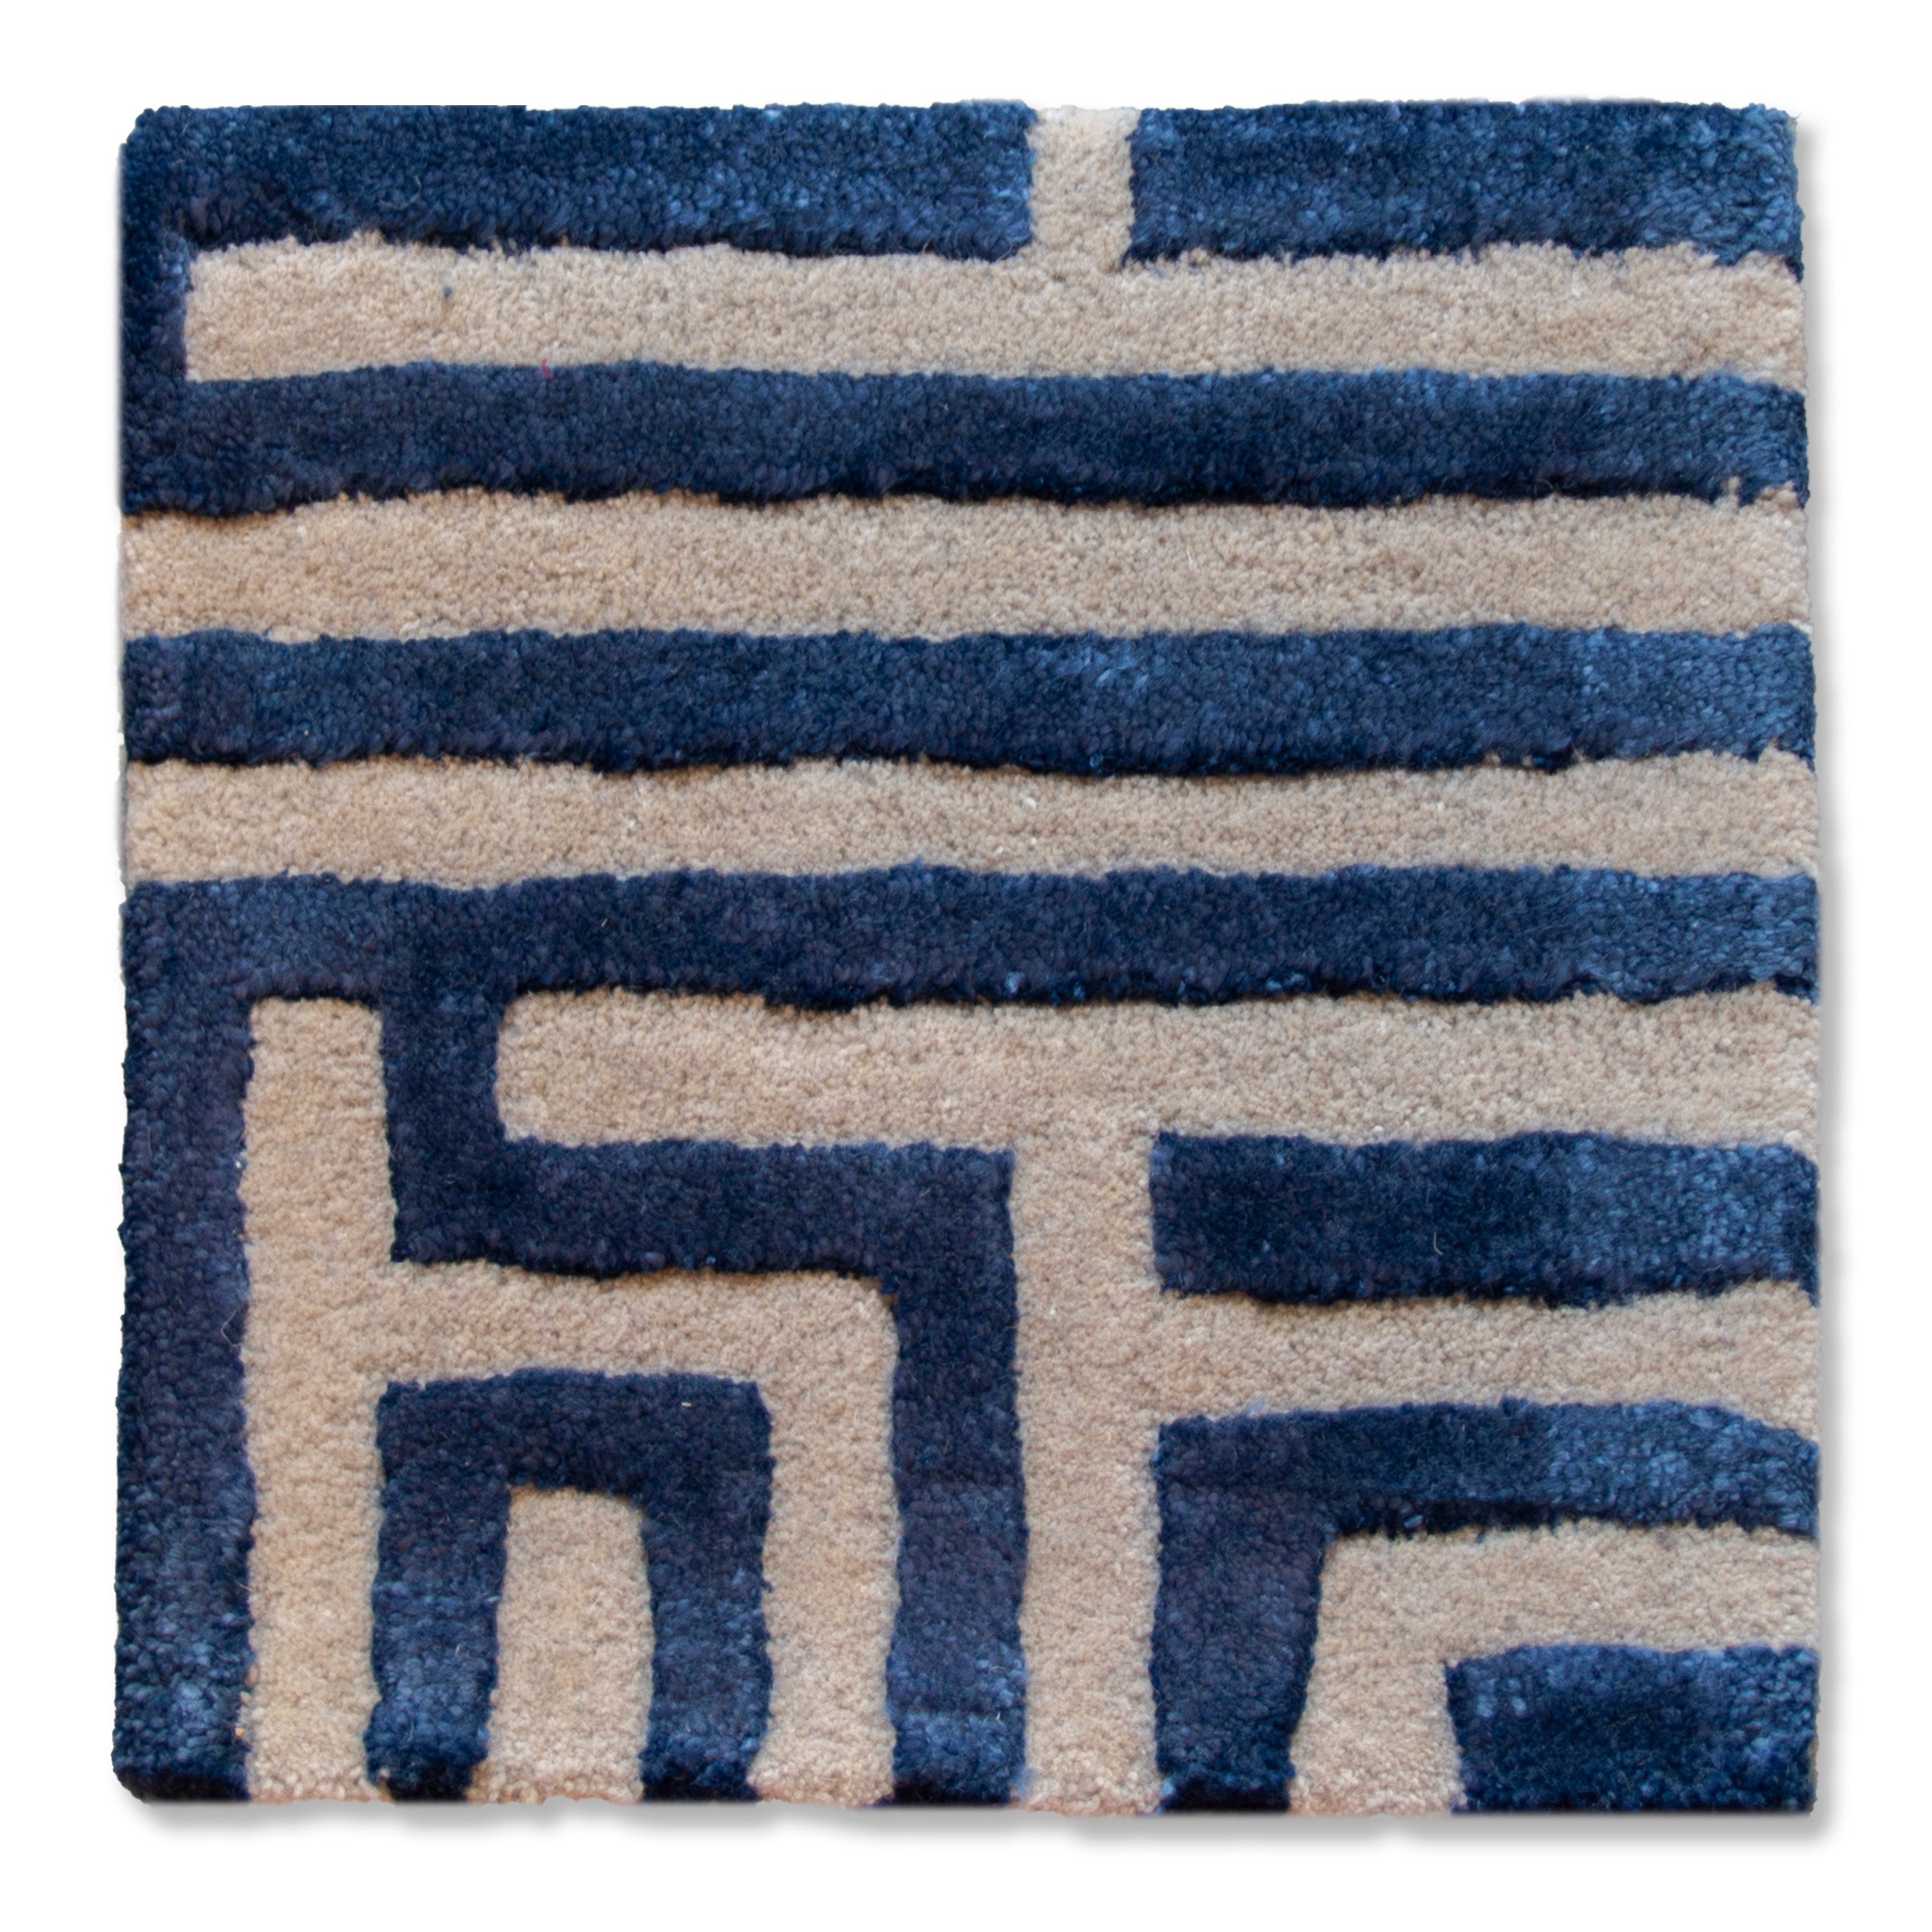 Labyrinth Collection Maze Rug Sample (12x12) by Kevin Francis Design | Luxury Home Decor